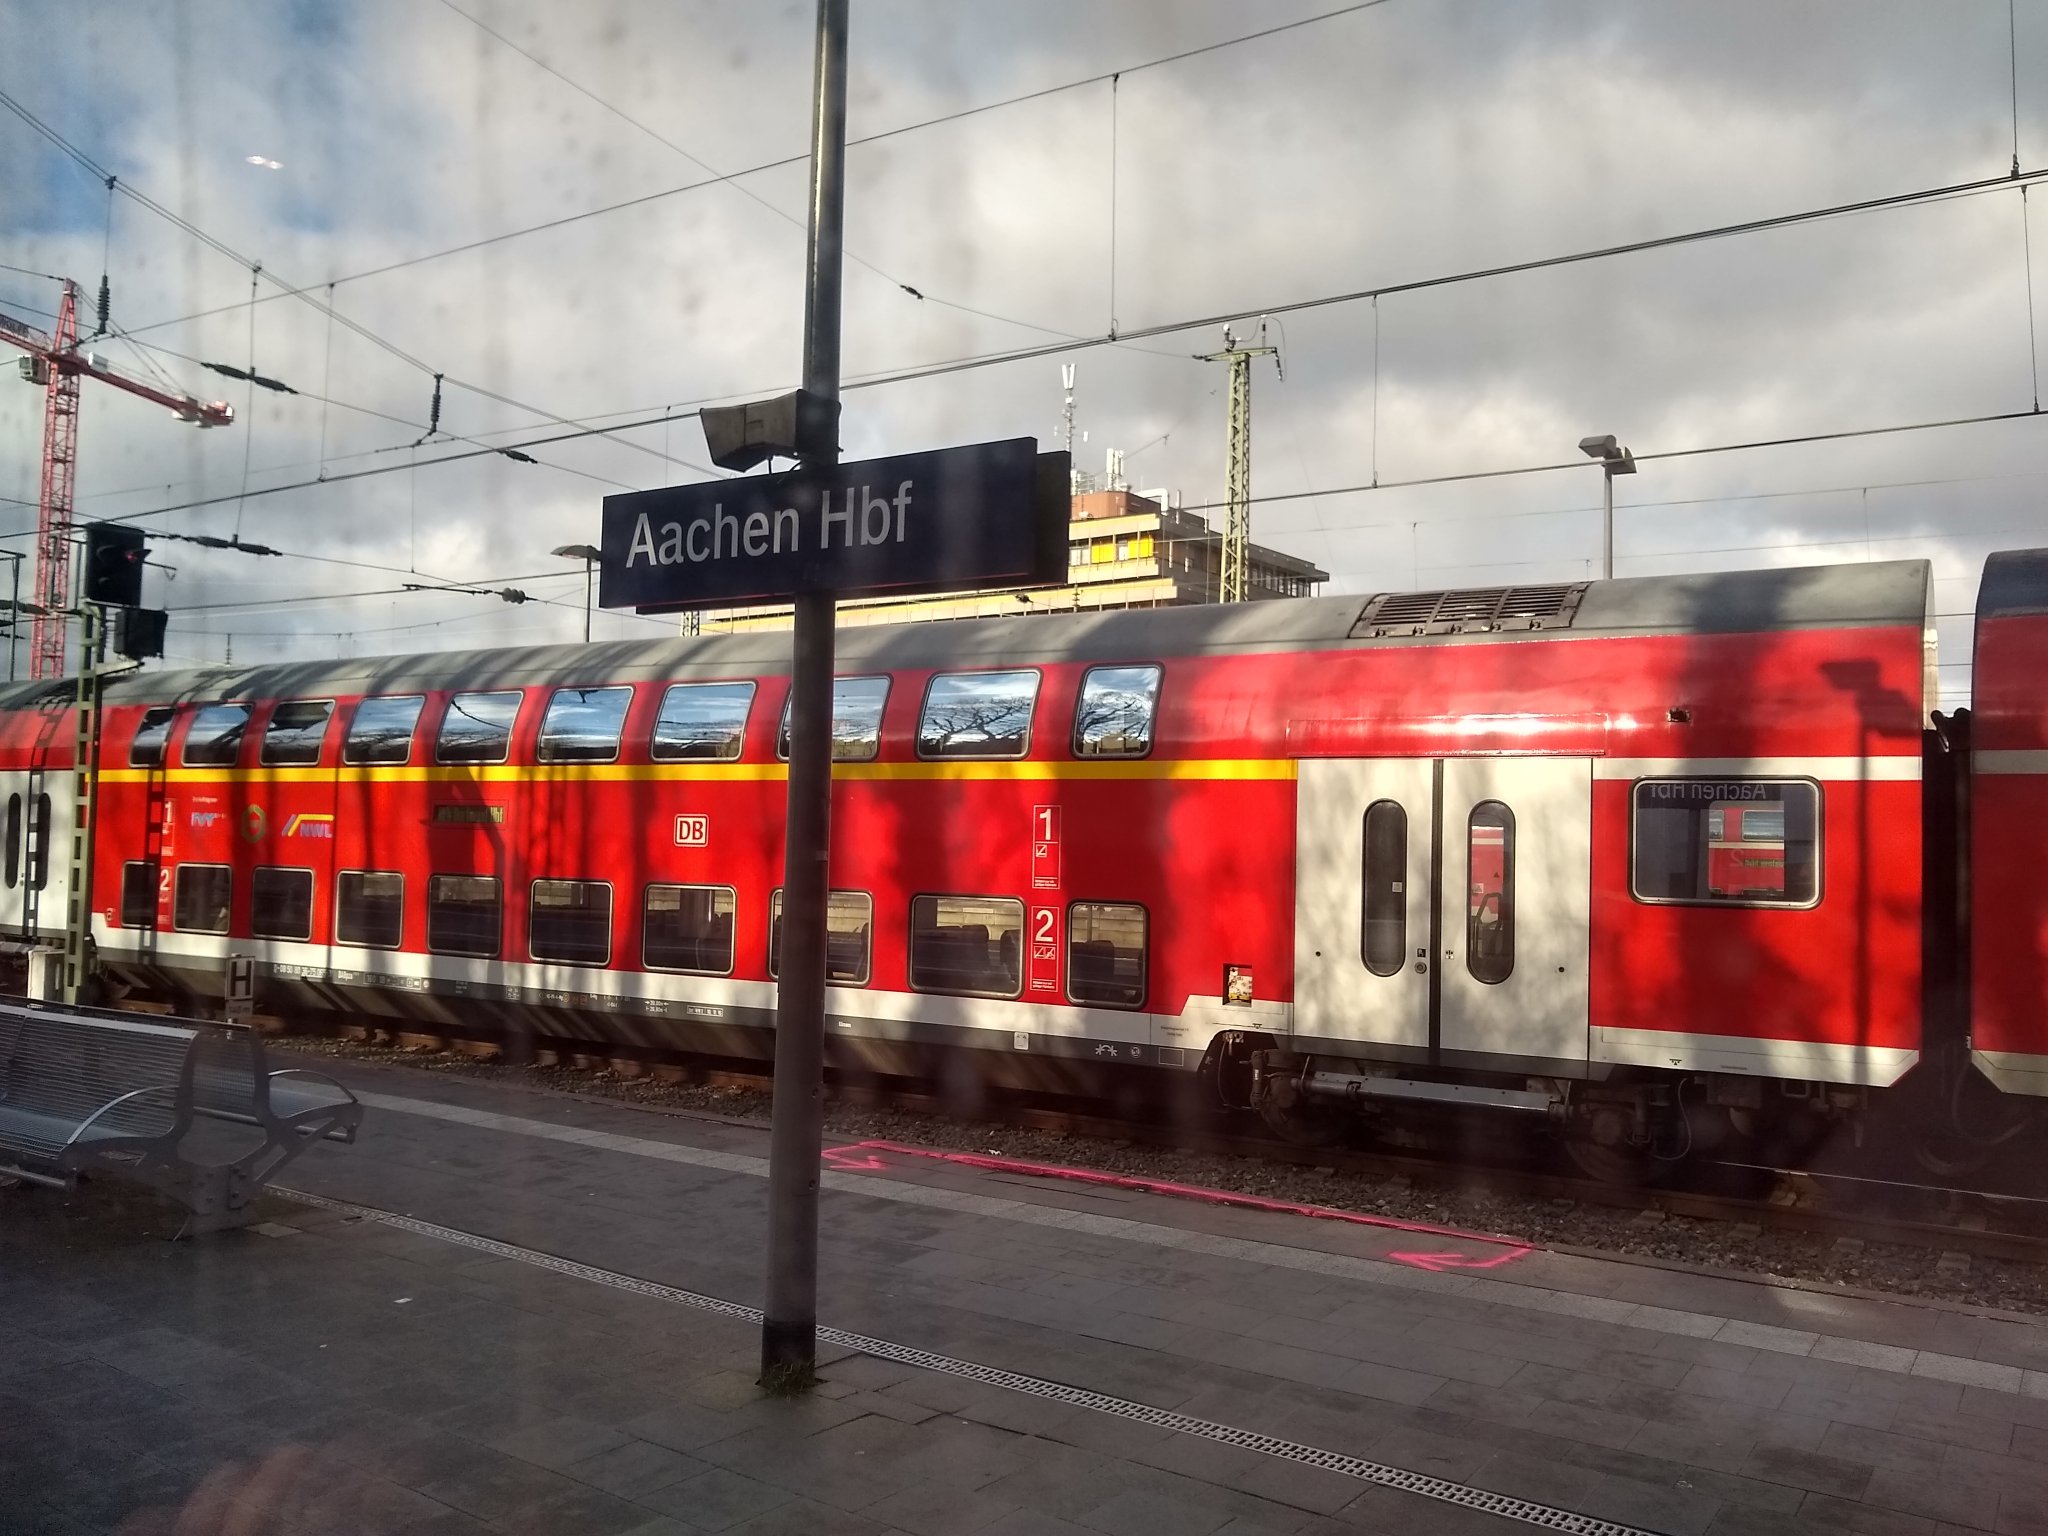 Platform sign saying Aachen Hbf with a double-decker red DB regional train